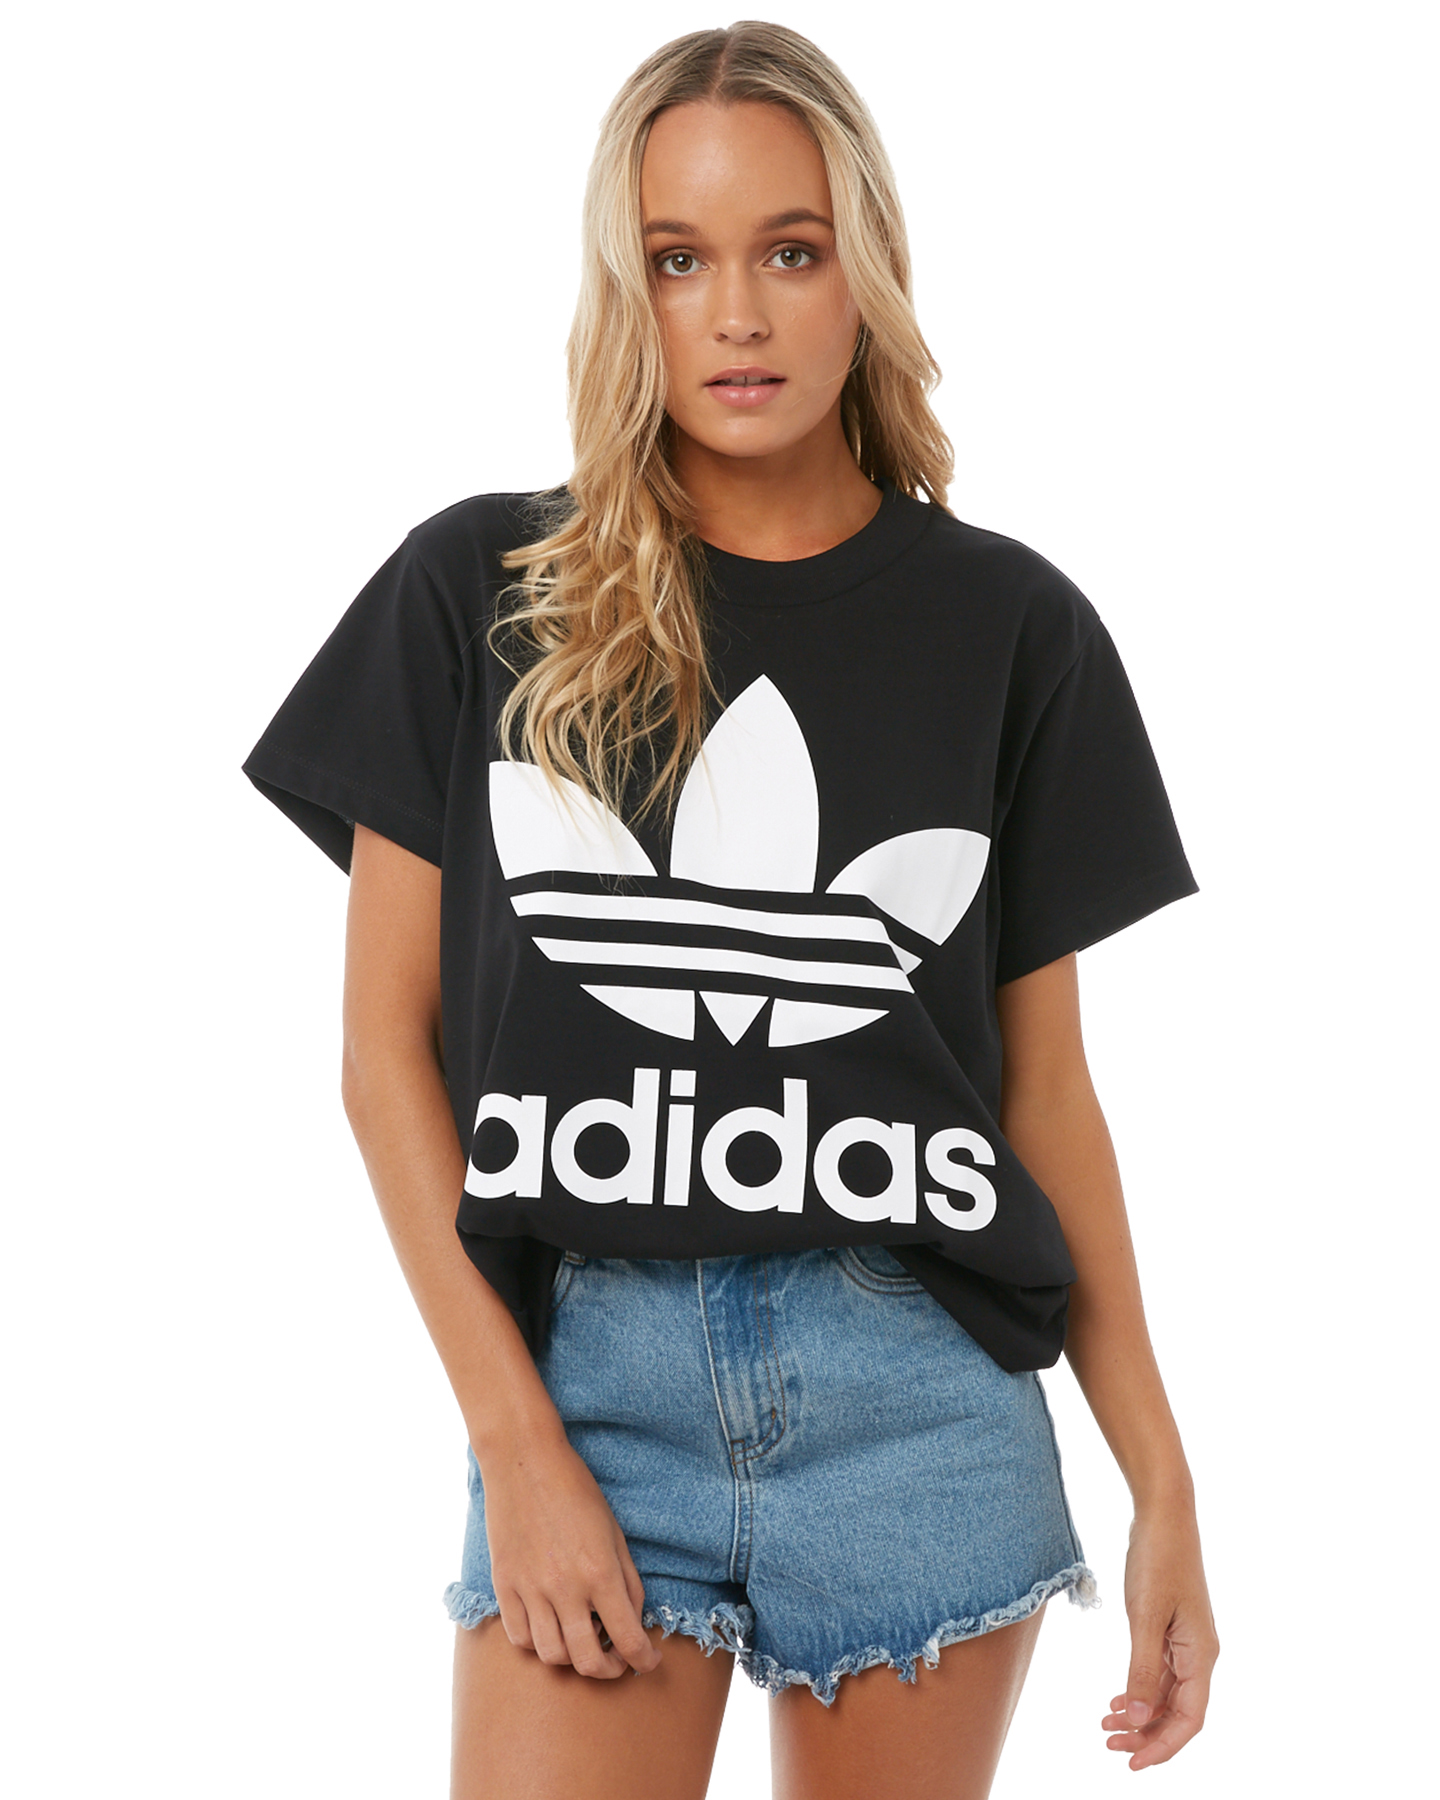 11 Premium Adidas Outfits to Inspire You - Baby Fashion